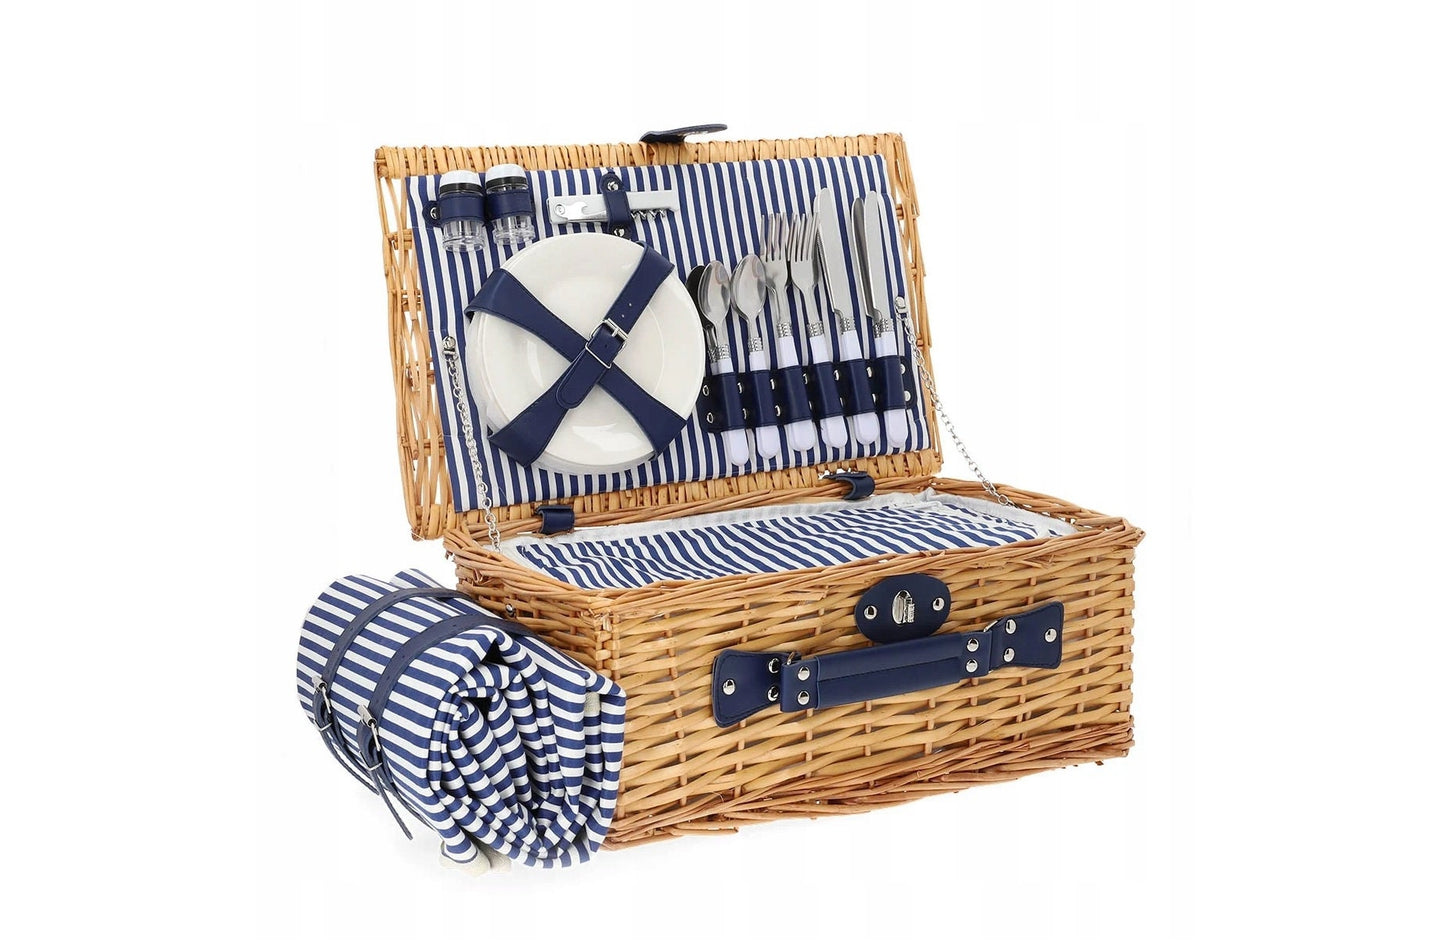 A Wicker Picnic Basket for 4 with Stripes with Cutlery Glass Set | Personalization Basket Gift for anniversaries, weddings, picnic, outdoor